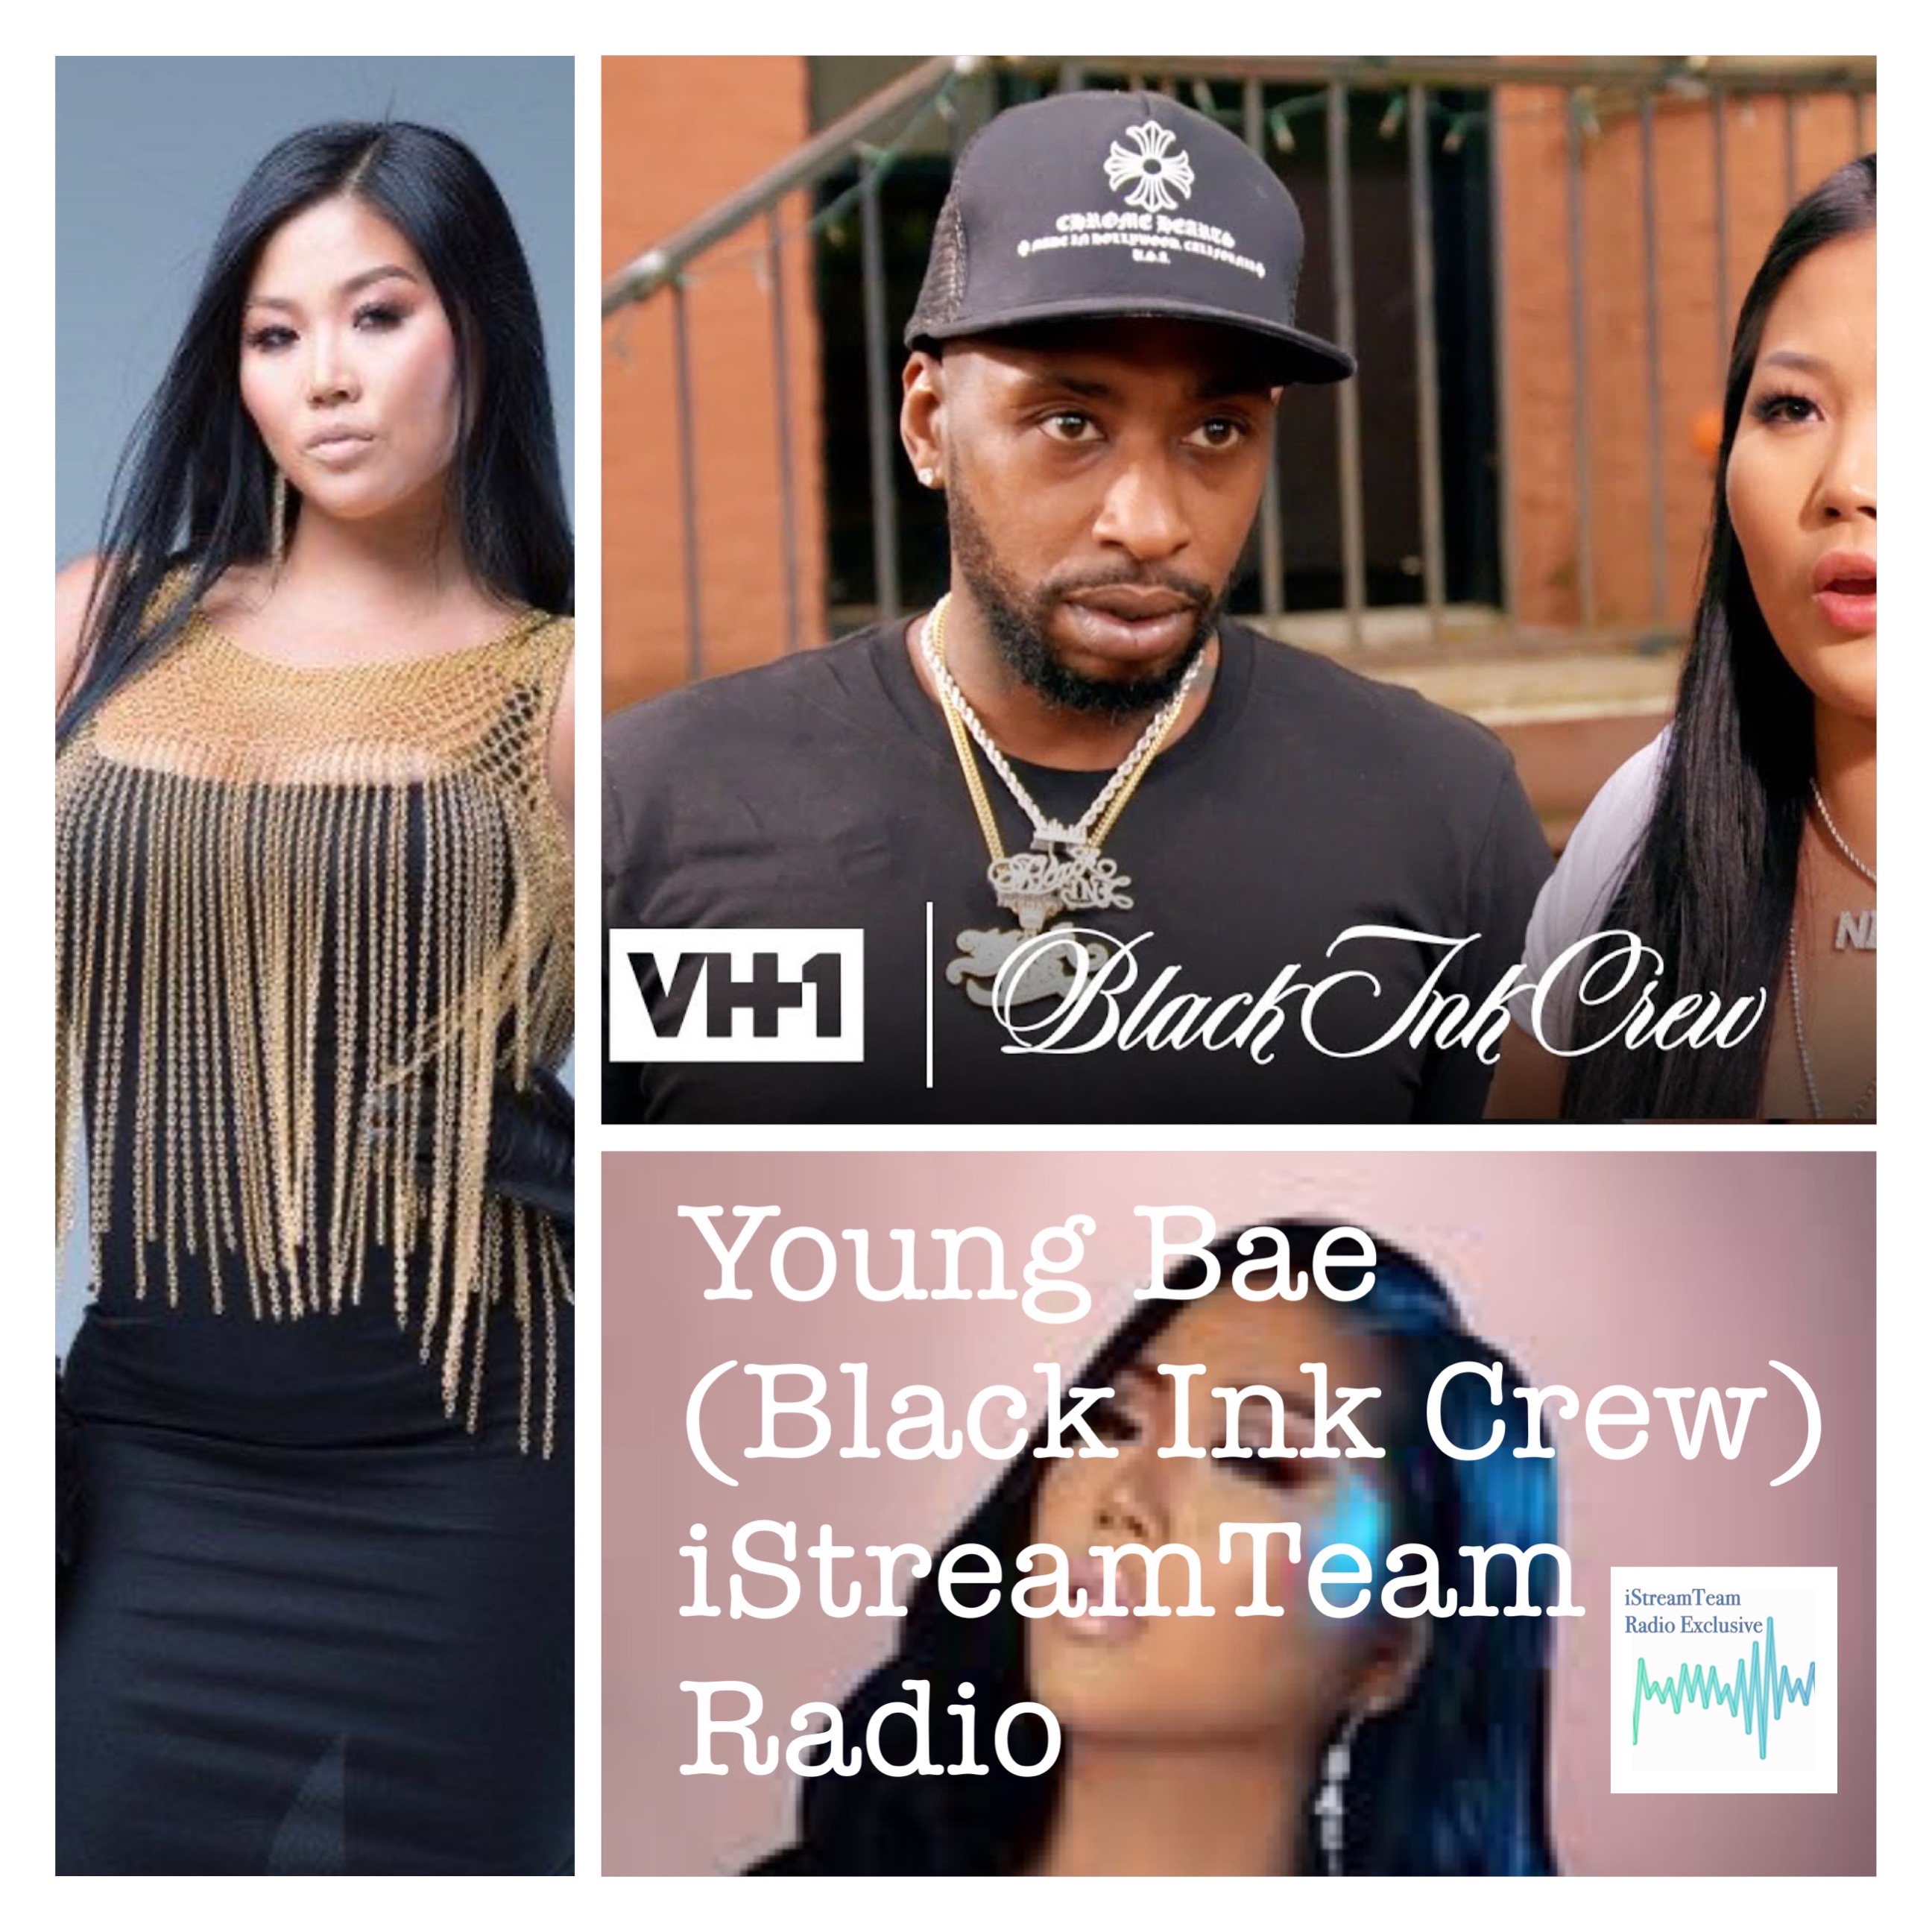 Art for iStreamTeam Promo by Young Bae - Black Ink Crew (VH-1)